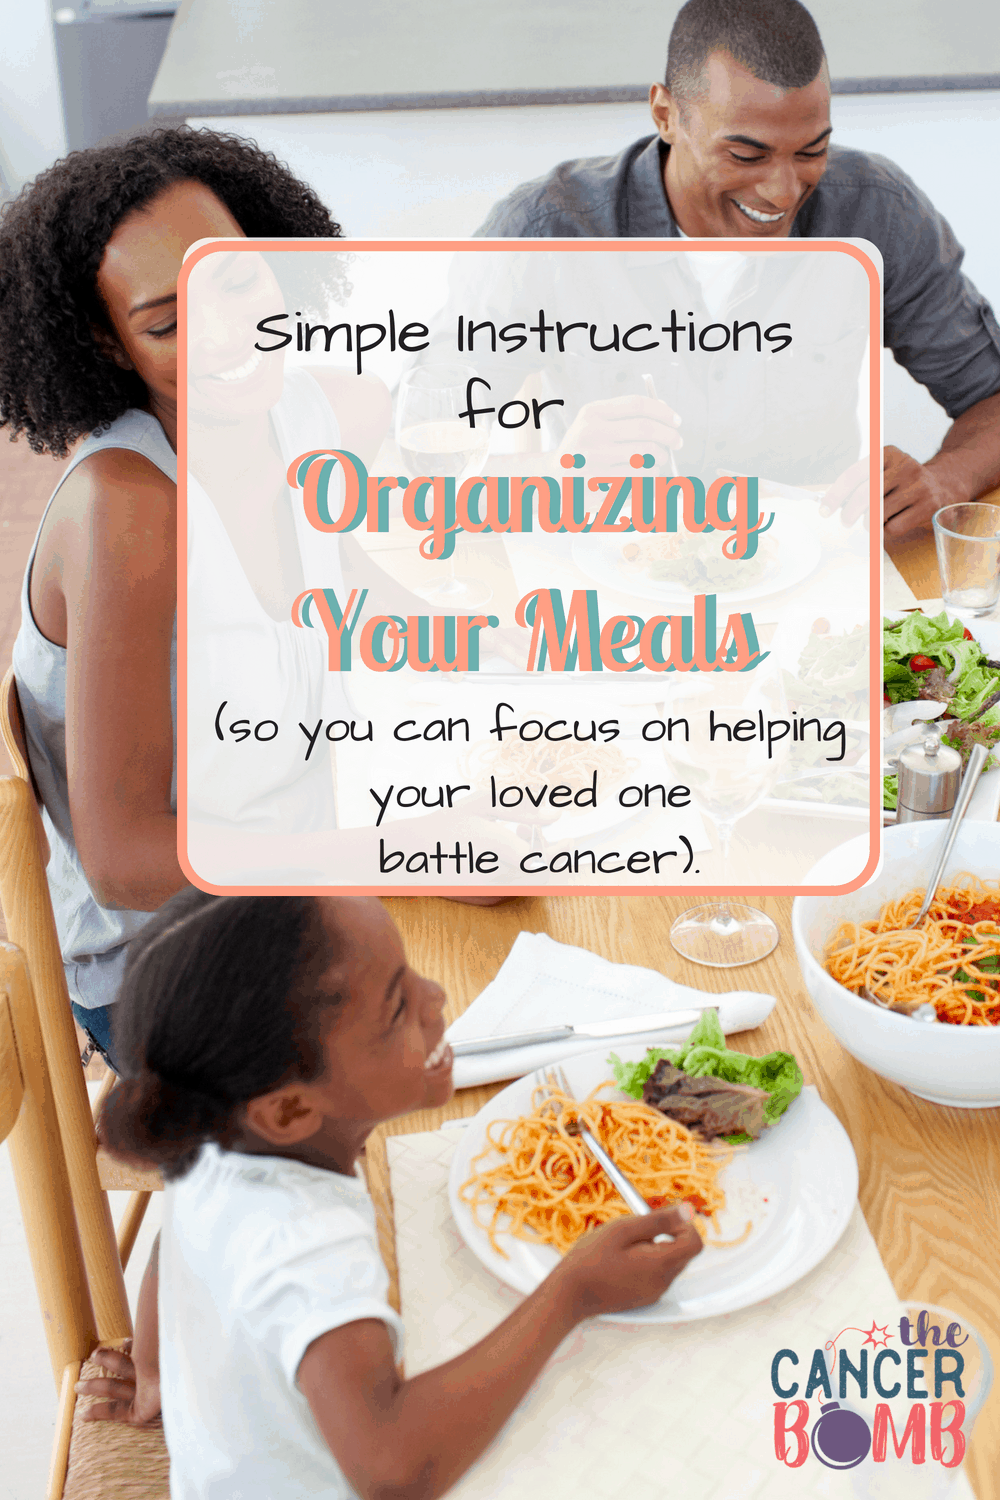 Simple Steps for Organizing Your Meals…so you can focus on helping your loved one battle cancer. The struggle is real! Cancer takes over your whole life and figuring out how to deal with all of this AND take care of the family I have at home is really hard! I desperately appreciate anything that can help me manage all this. This step-by-step guide to organizing your meals is a game changer!